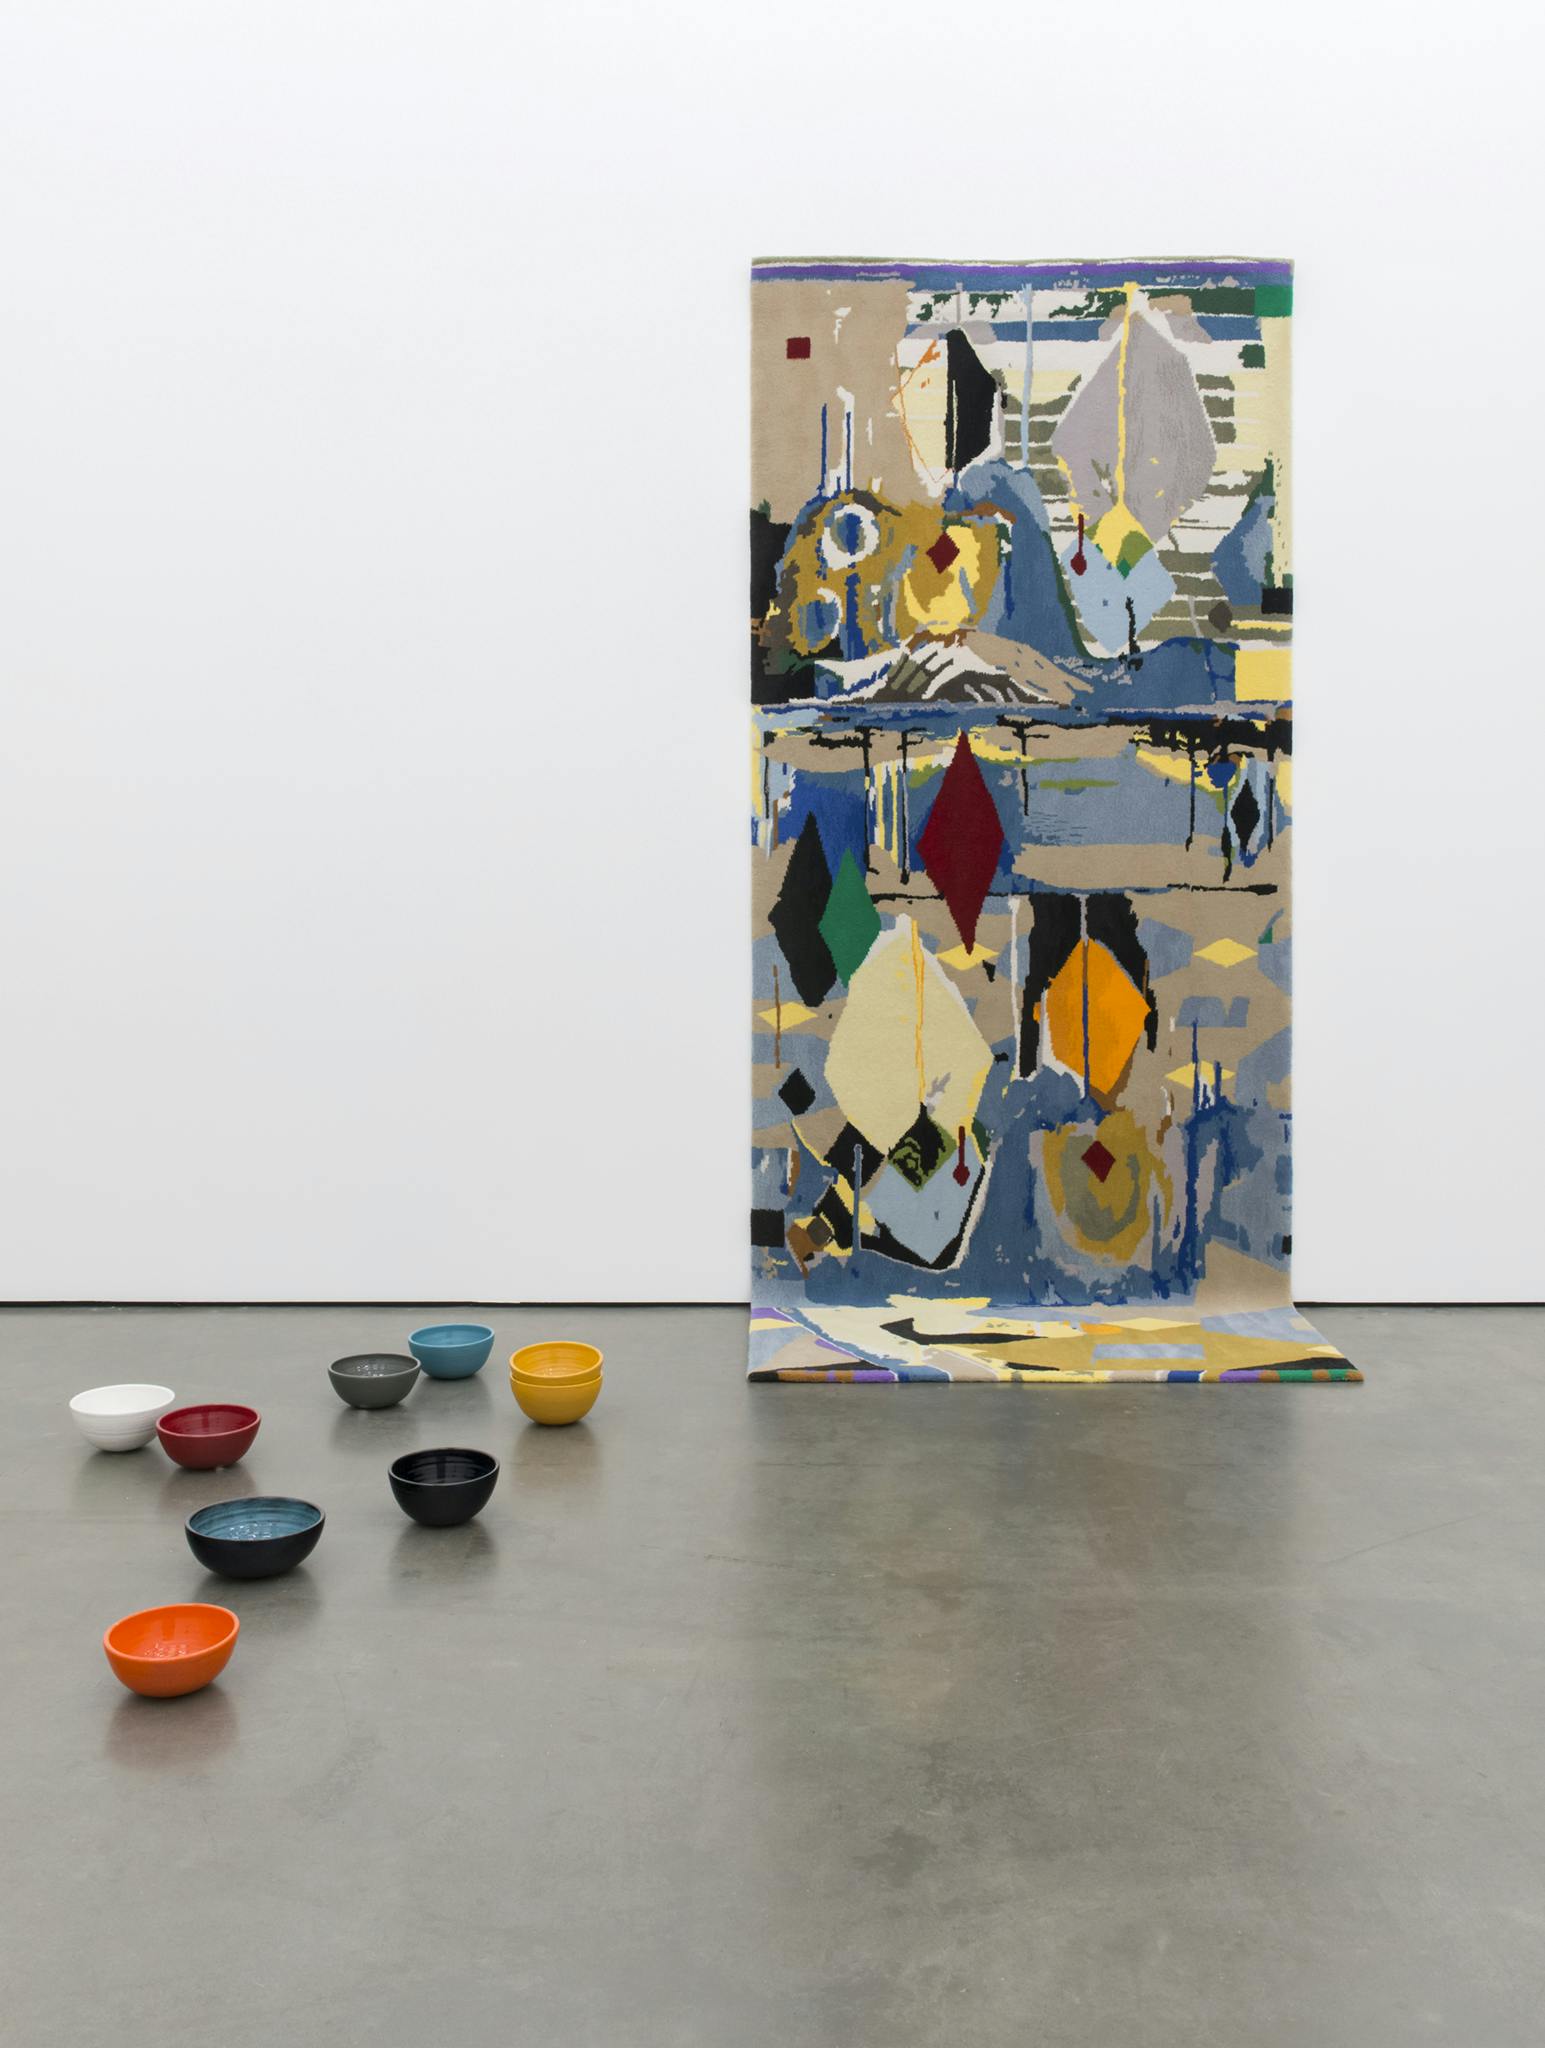 A colourful large-sized rug is installed on the white gallery wall. Eight various coloured ceramic bowls are placed close to the bottom part of the rug which is dragging on the floor.  